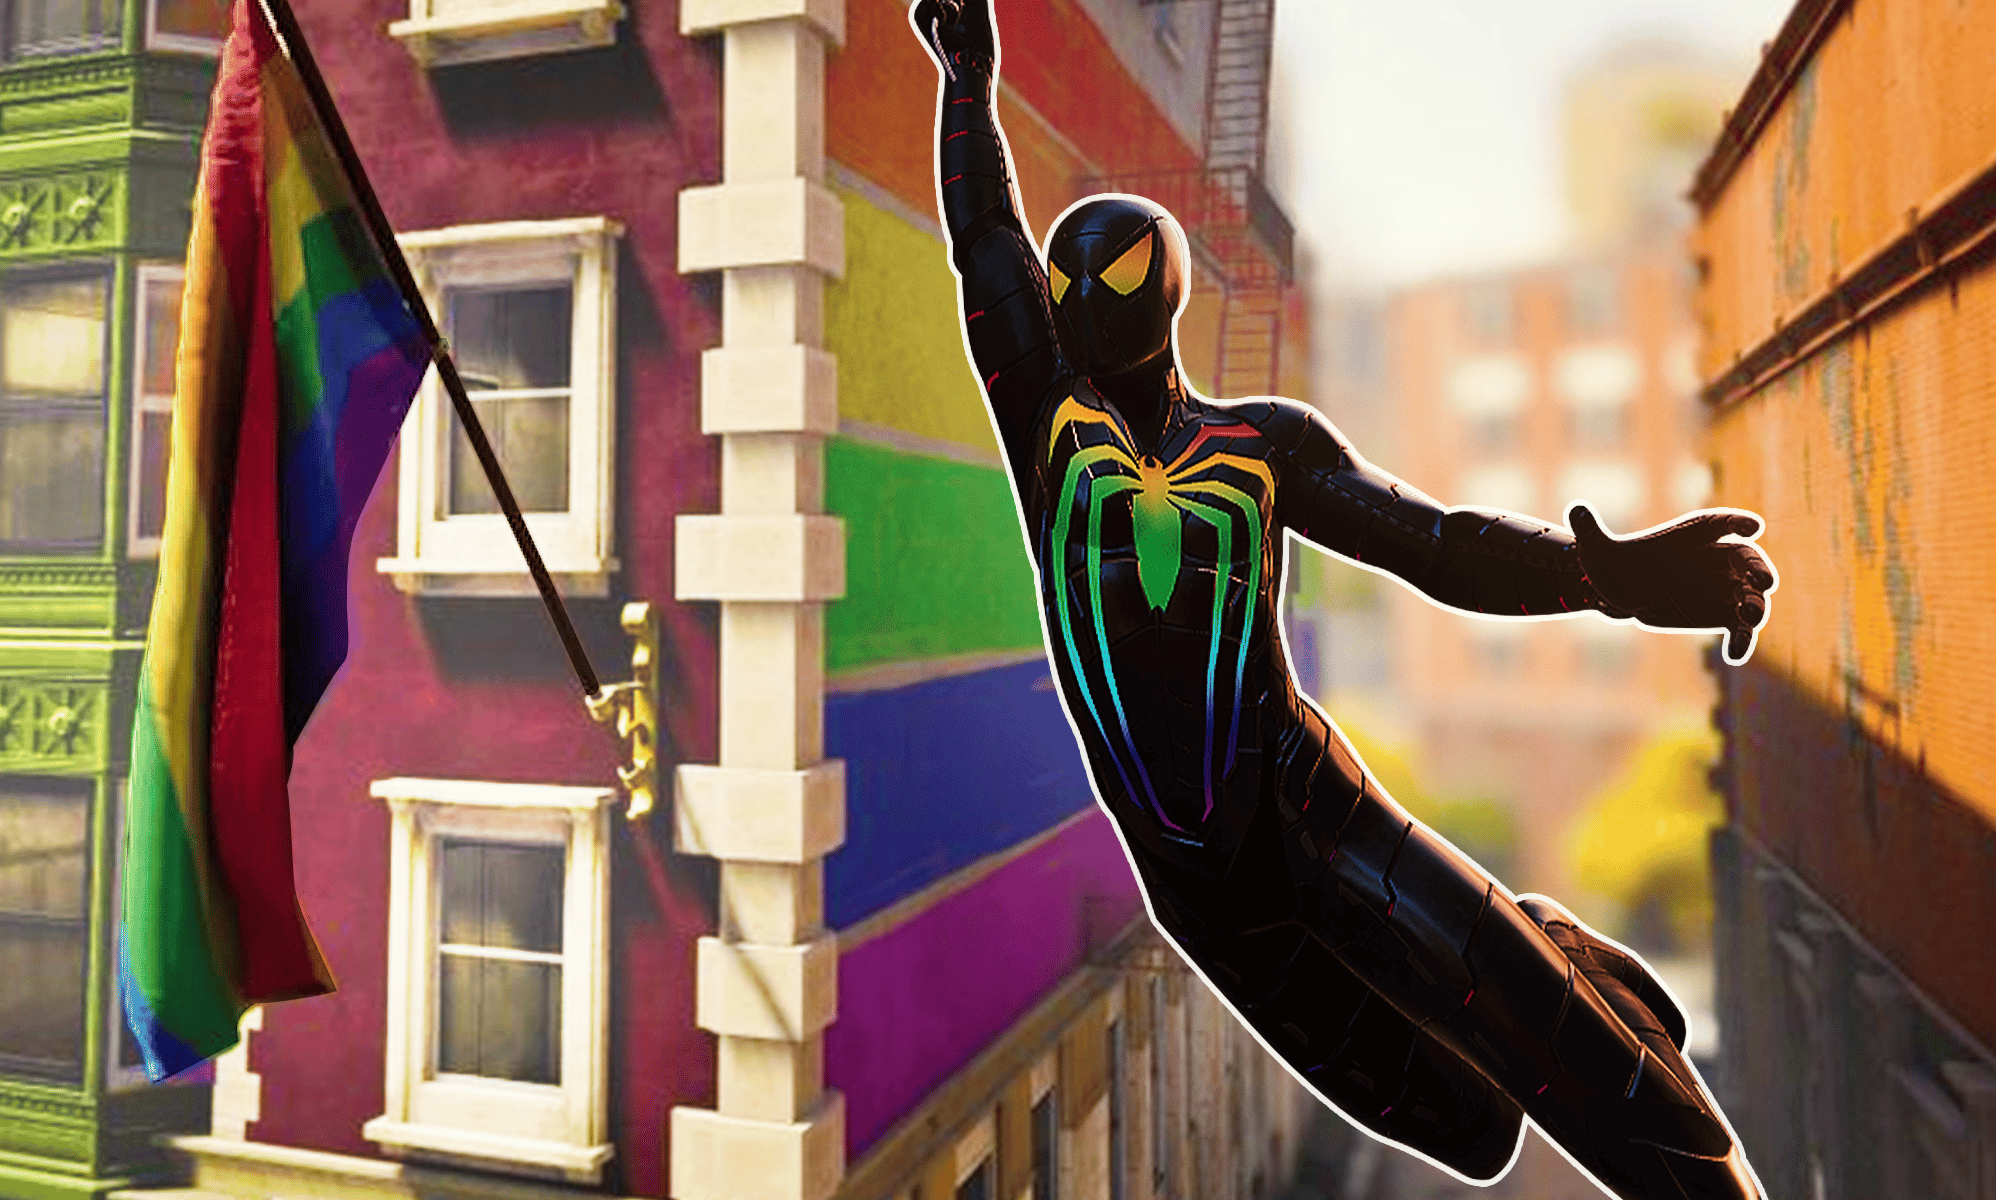 Spider-Man mod that replaced pride flags now removed by major